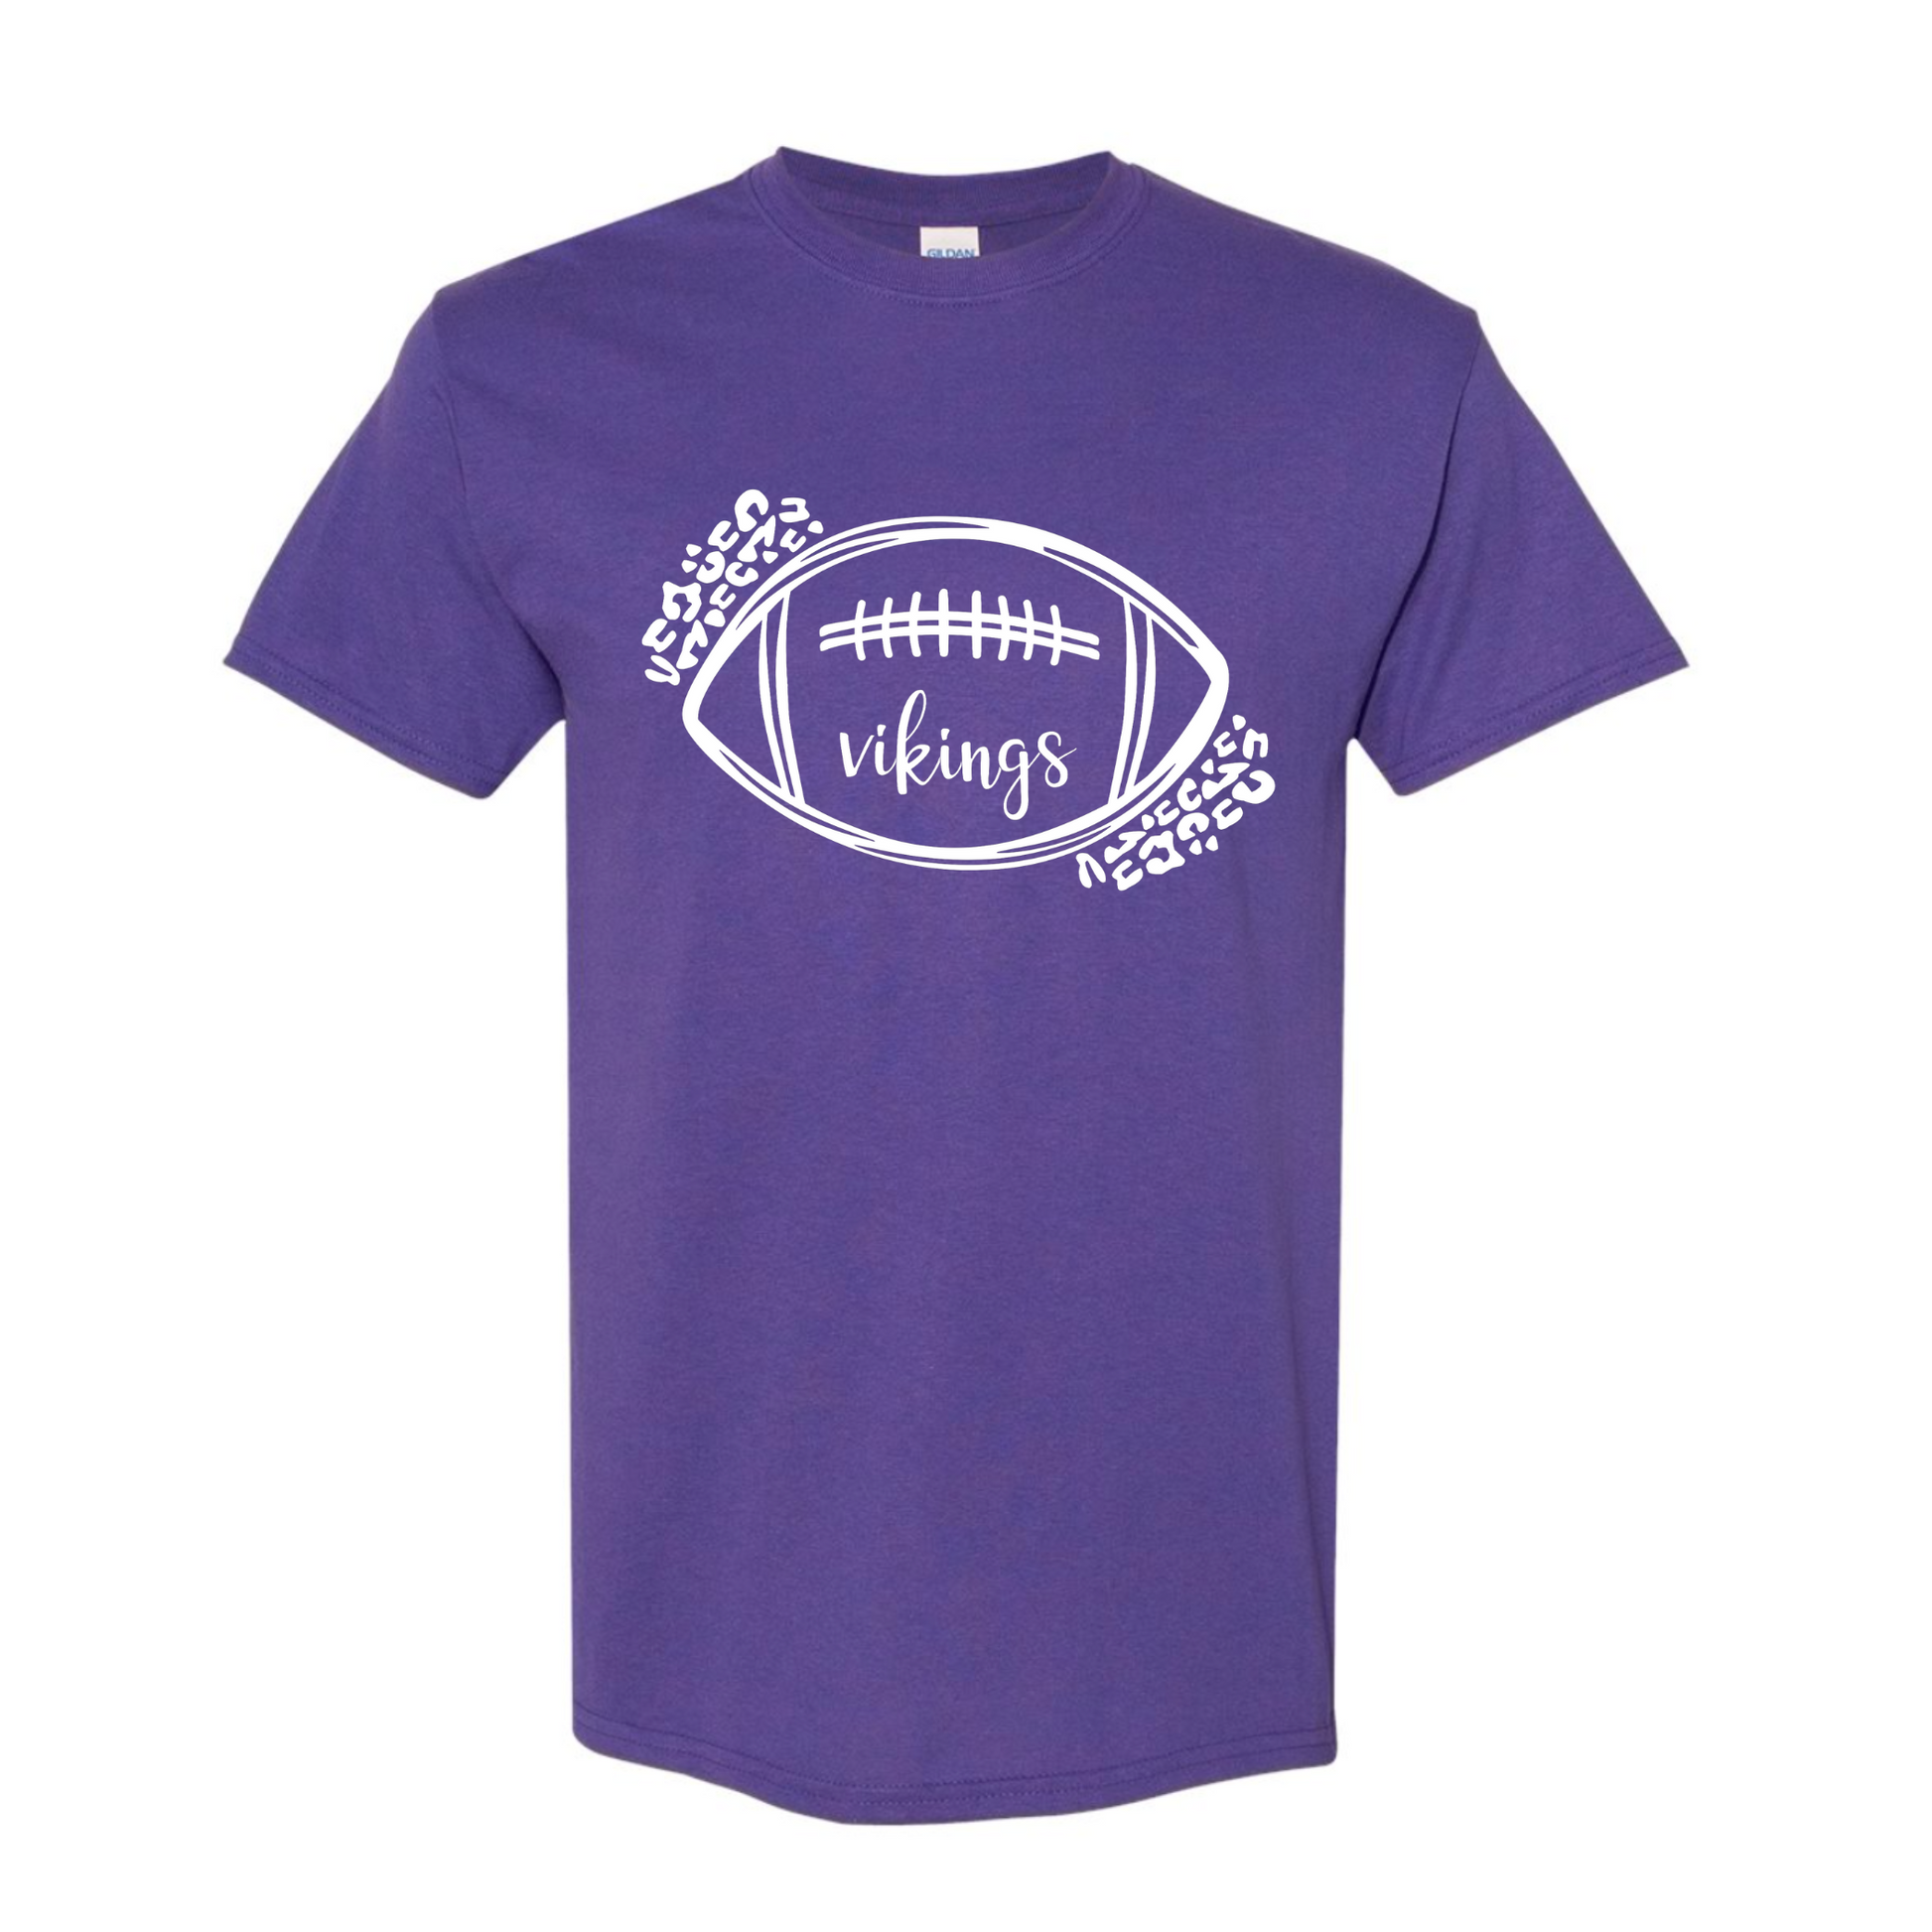 Leopard Vikings Graphic - Purple T-Shirt with white writing. The front features a sketchy outline of a football with "vikings" in a script font inside the bottom of the football with leopard print enclosing the top left and bottom right of the football. This is the front view of the t-shirt.